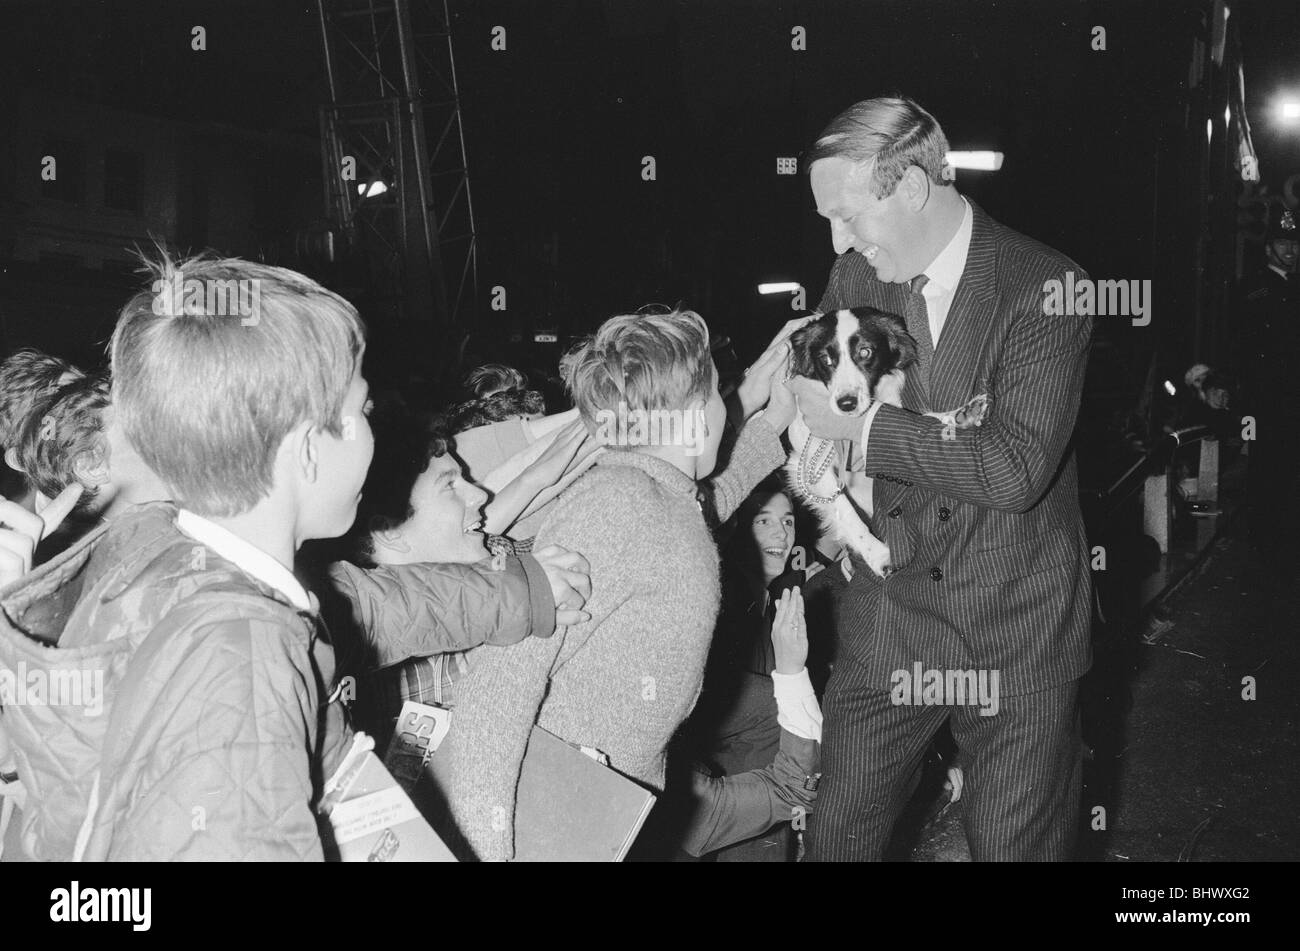 1966 World Cup Tournament in England. A World cup banquet was held for the victorious England team at the Royal Garden Hotel following thier victory over West Germany in the Final at Wembley. Hero Pickles the dog who found the Jules Rimet after it had been stolen before the tournament. 31st July 1966. Stock Photo